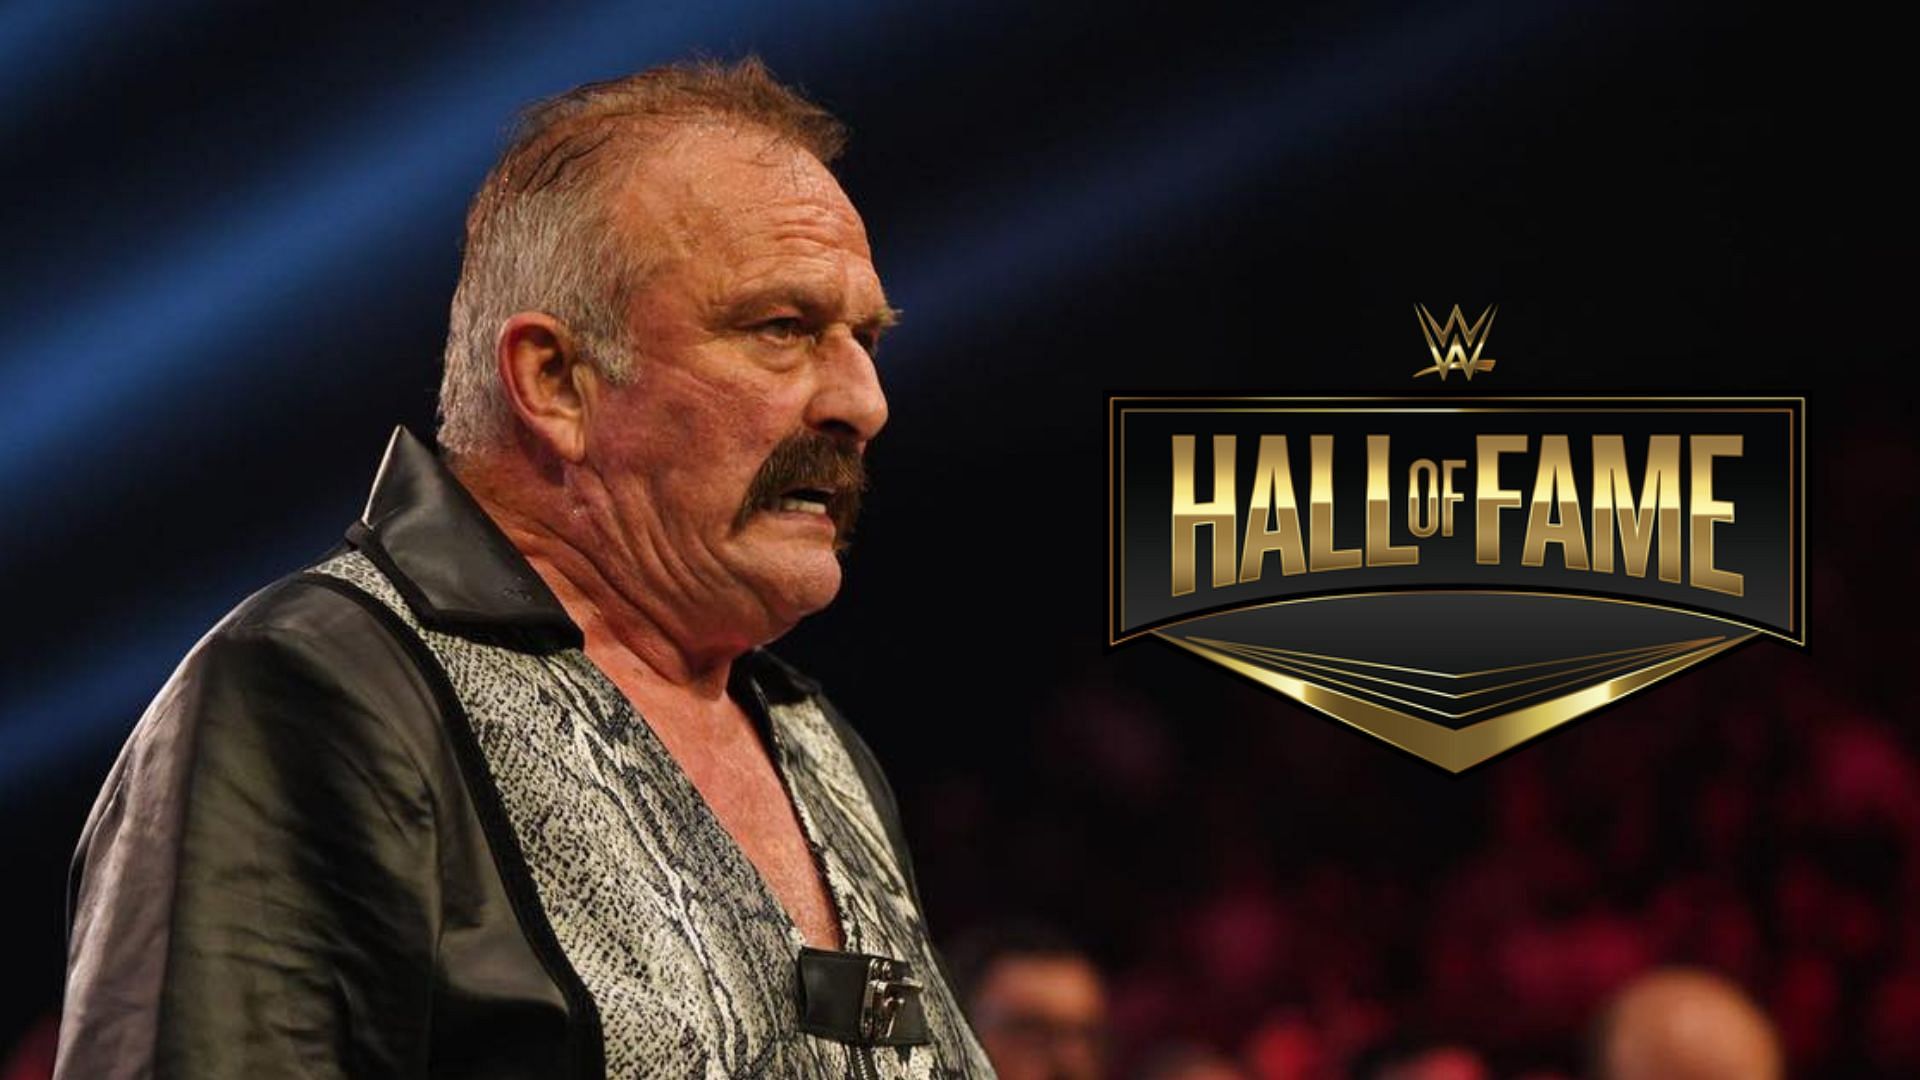 Which controversial figure does Jake Roberts think should be in the WWE Hall of Fame?